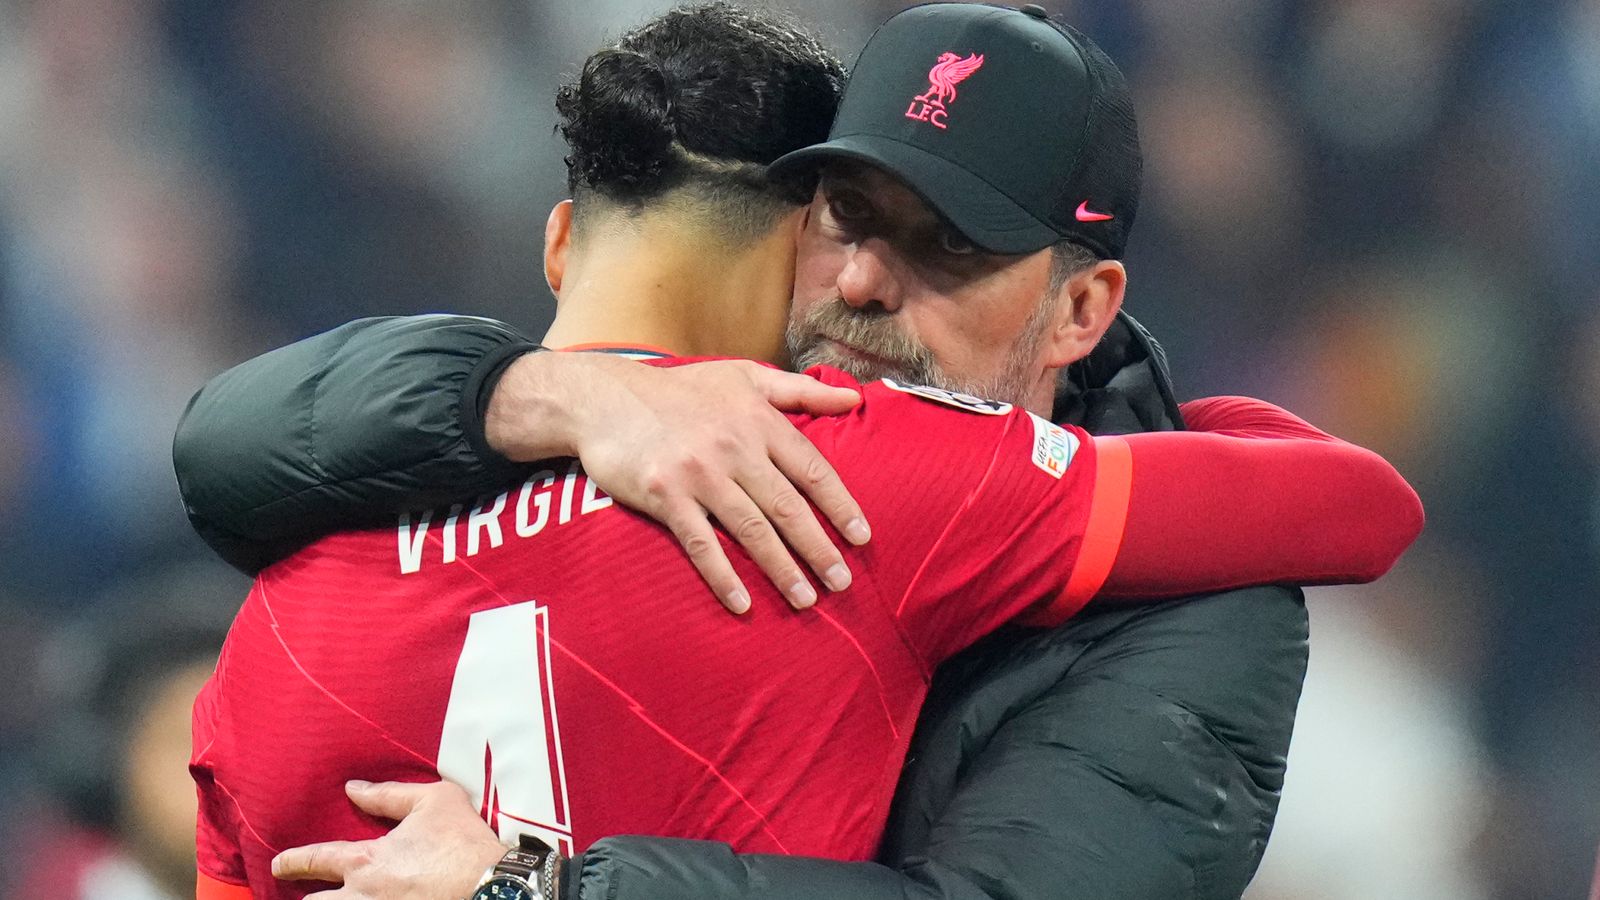 Jurgen Klopp confident Liverpool will come again: ‘Book your hotels for next year’s Champions League final’